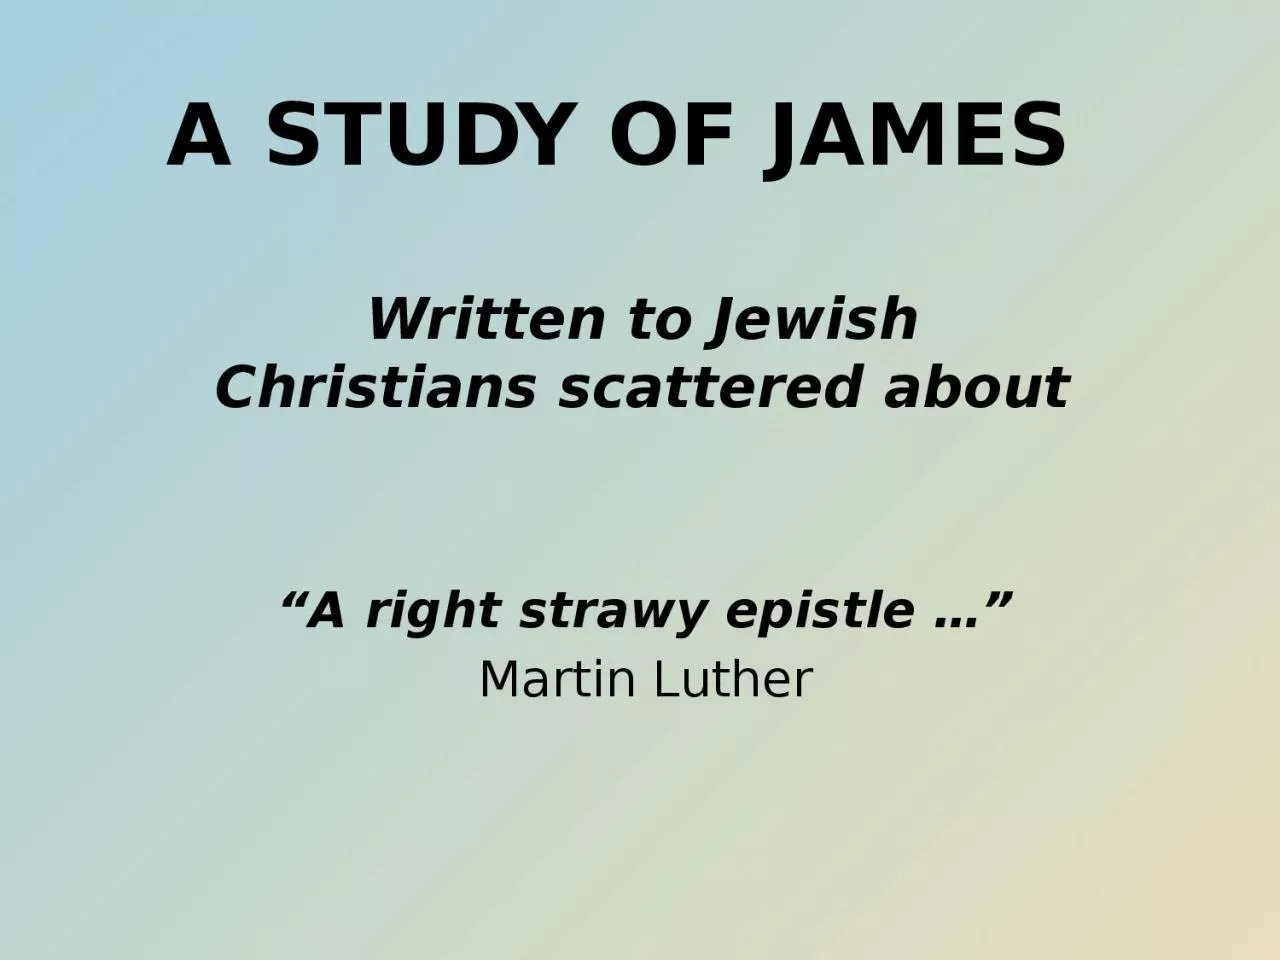 A Study of James Written to Jewish Christians scattered about